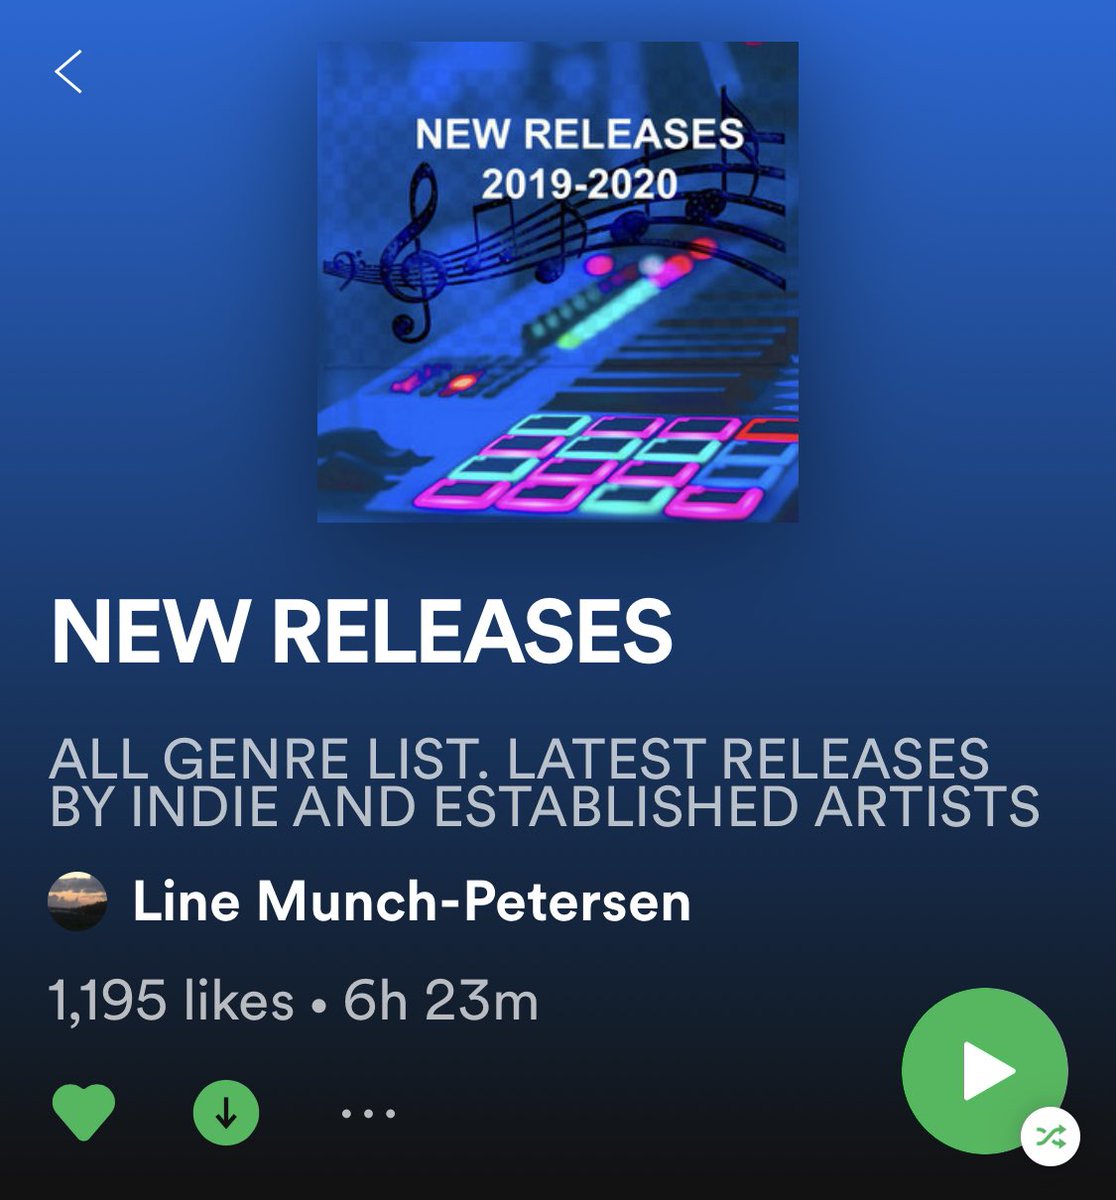 Huge thanks to @MunchLine for adding my new release to this awesome list! #spotifyartists #newreleases #NewMusicAlert